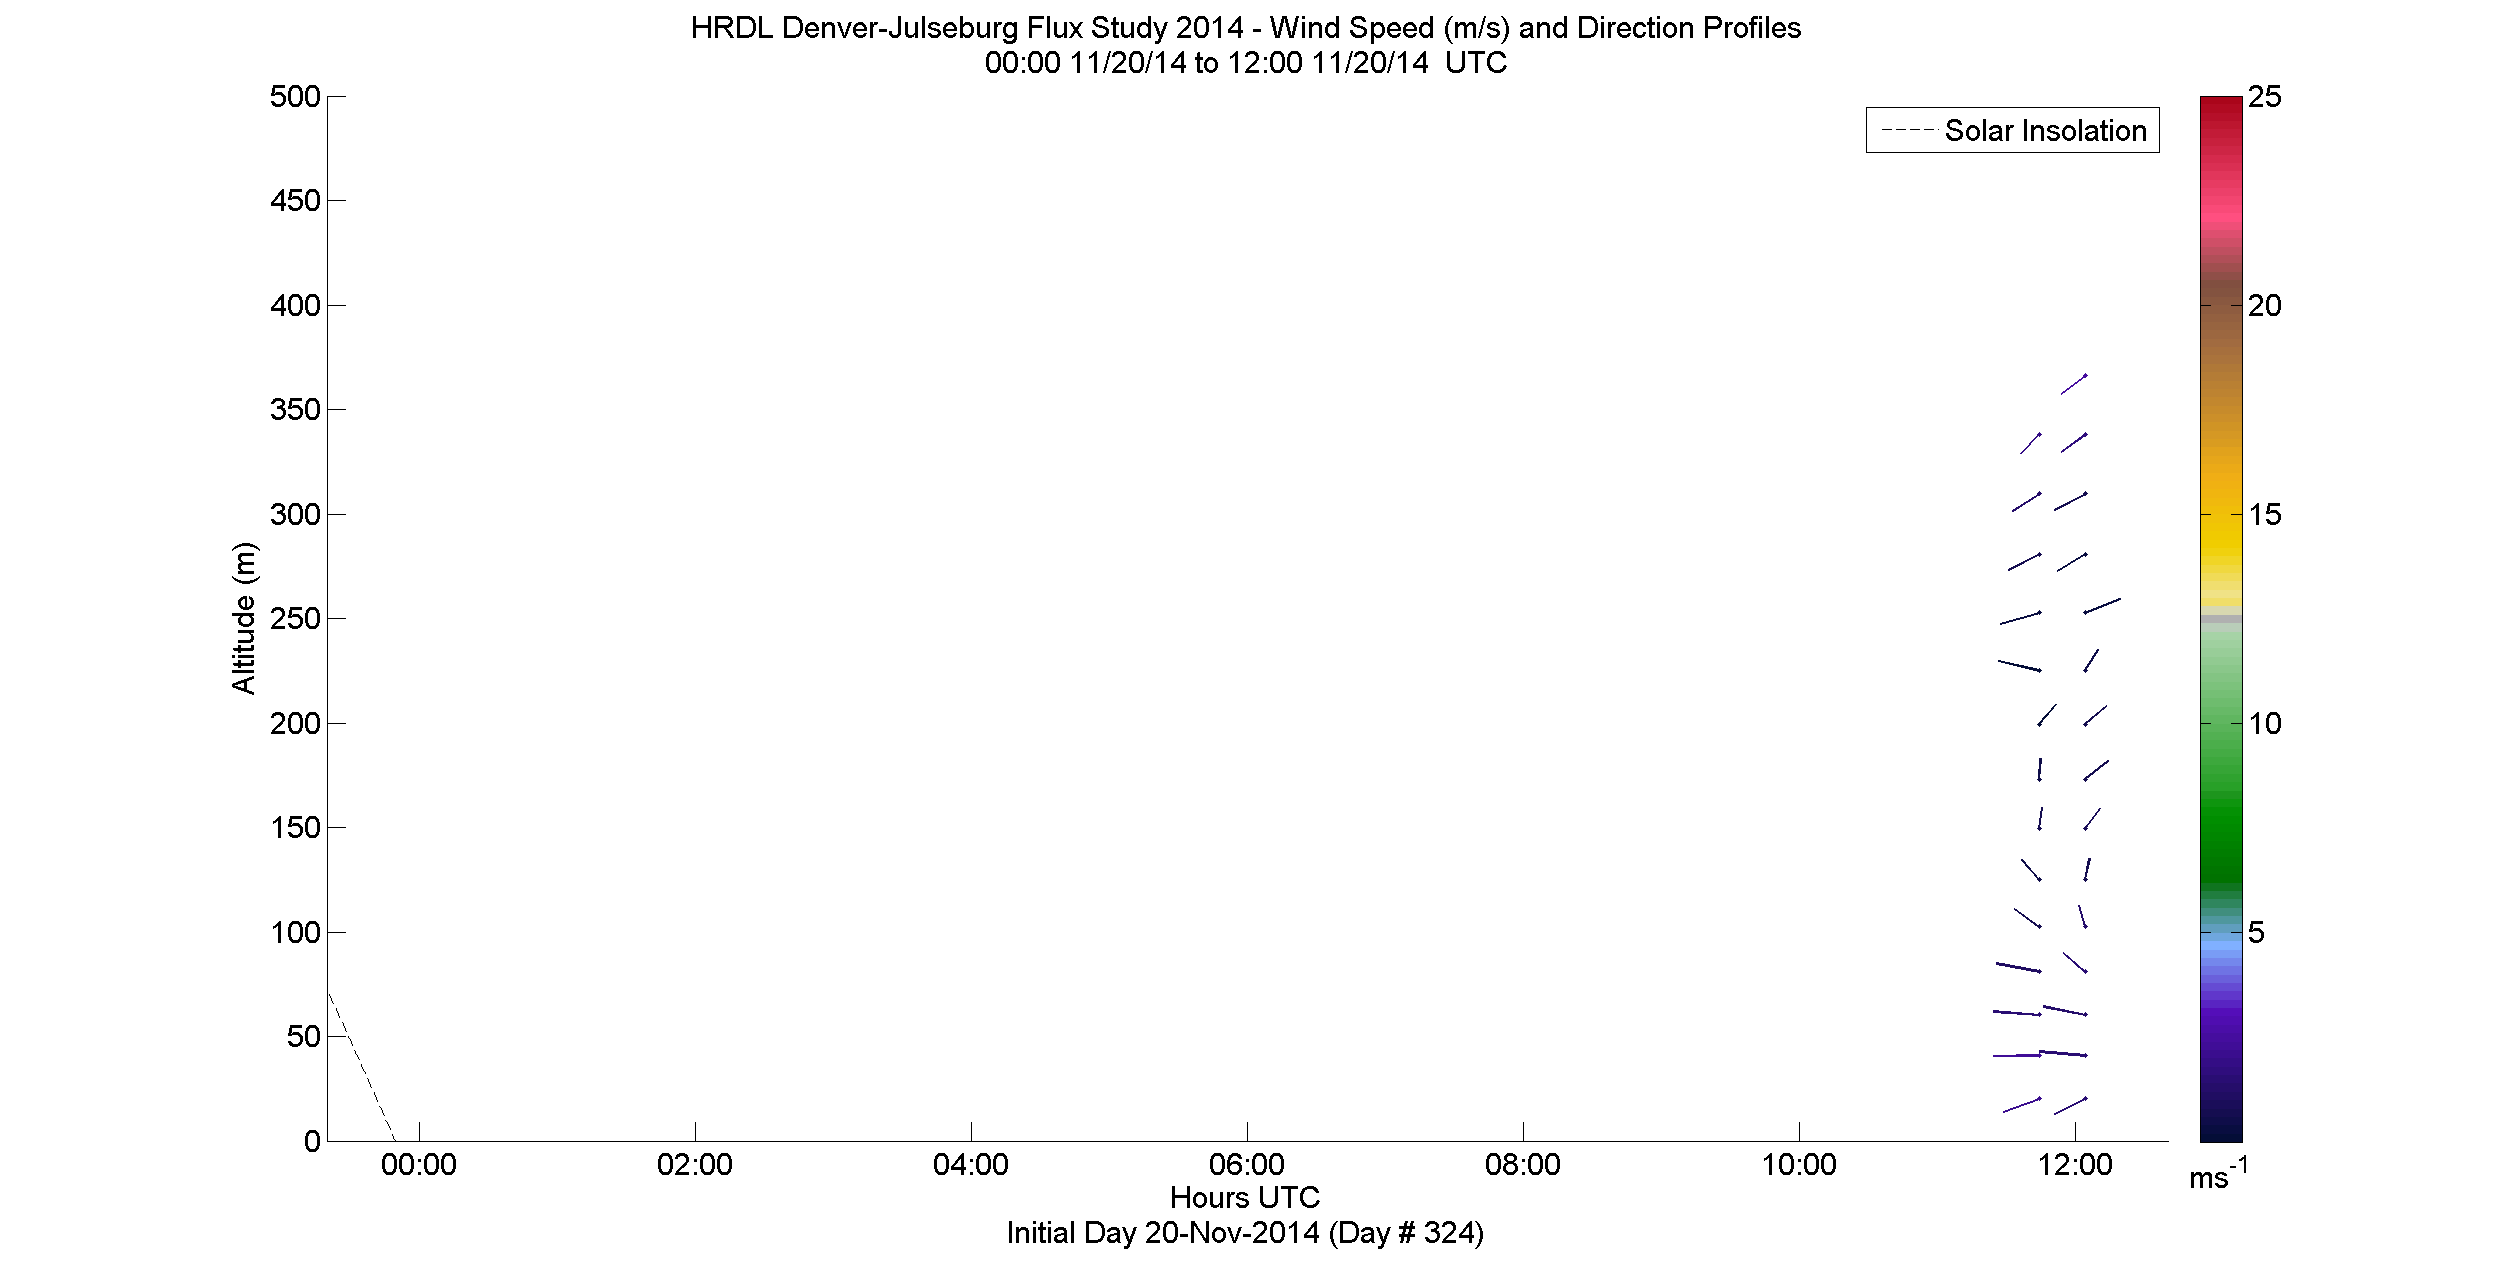 HRDL speed and direction profile - November 20 am